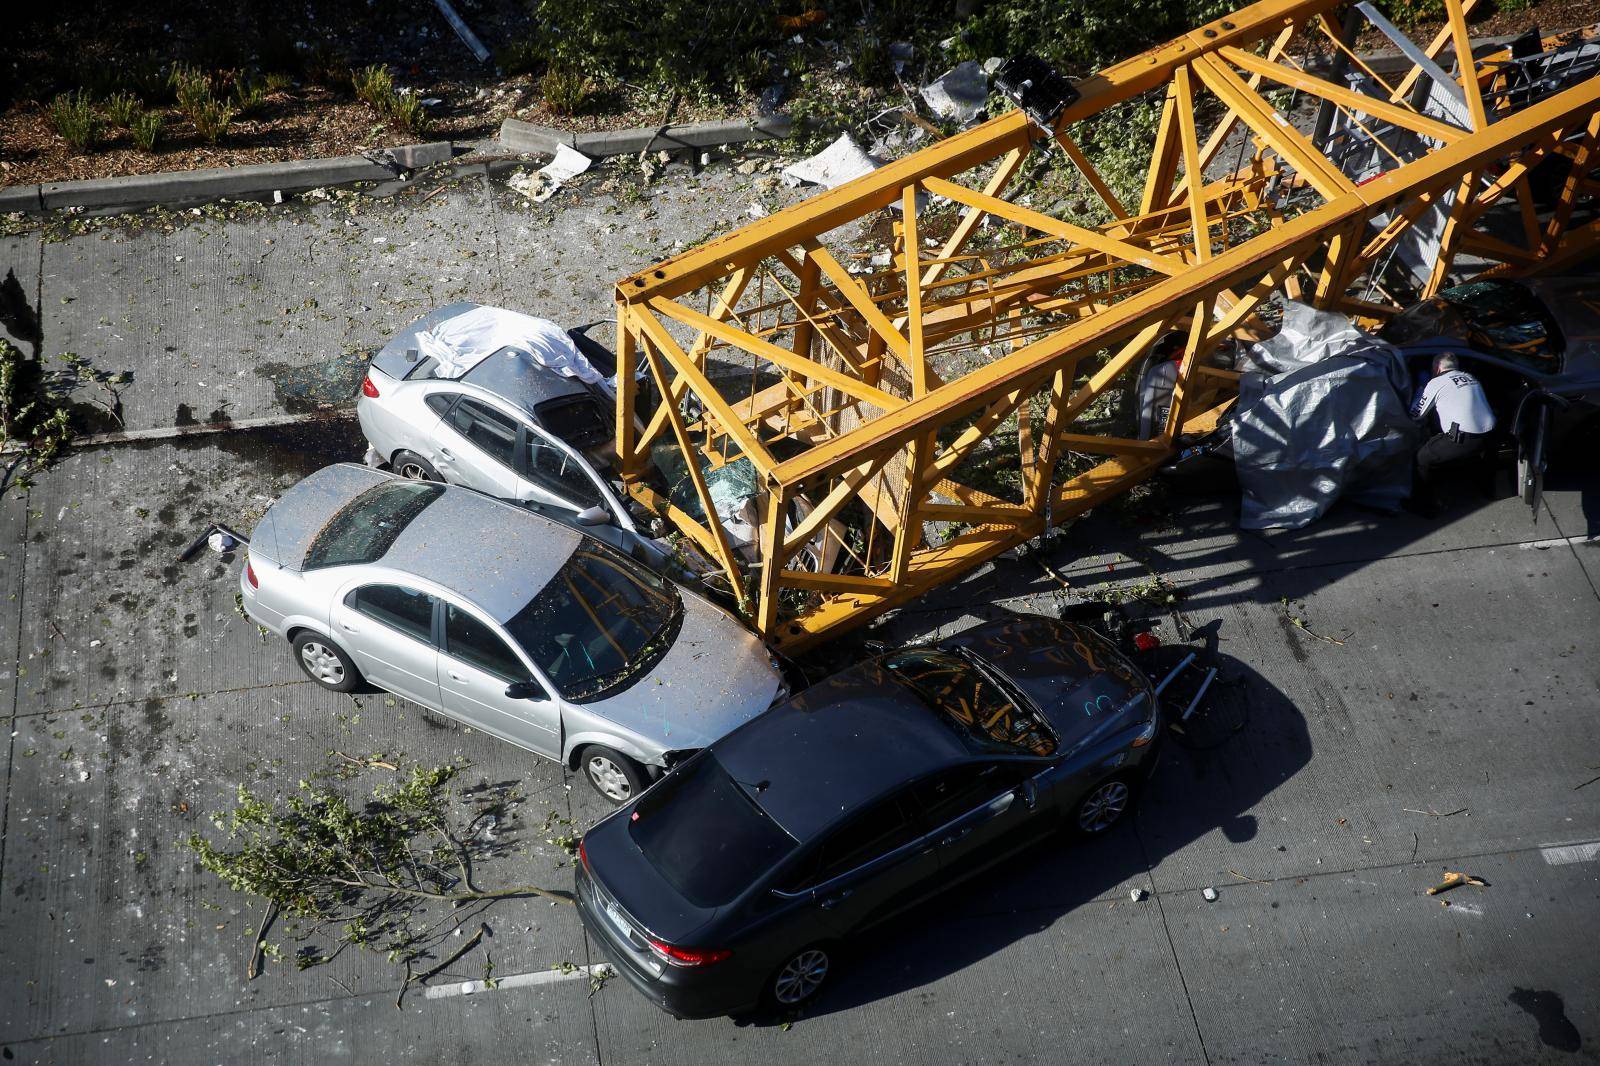 A member of the Seattle police department inspects one of the cars crushed by part of a construction crane on Mercer Street, which killed four people and injured several others in Seattle